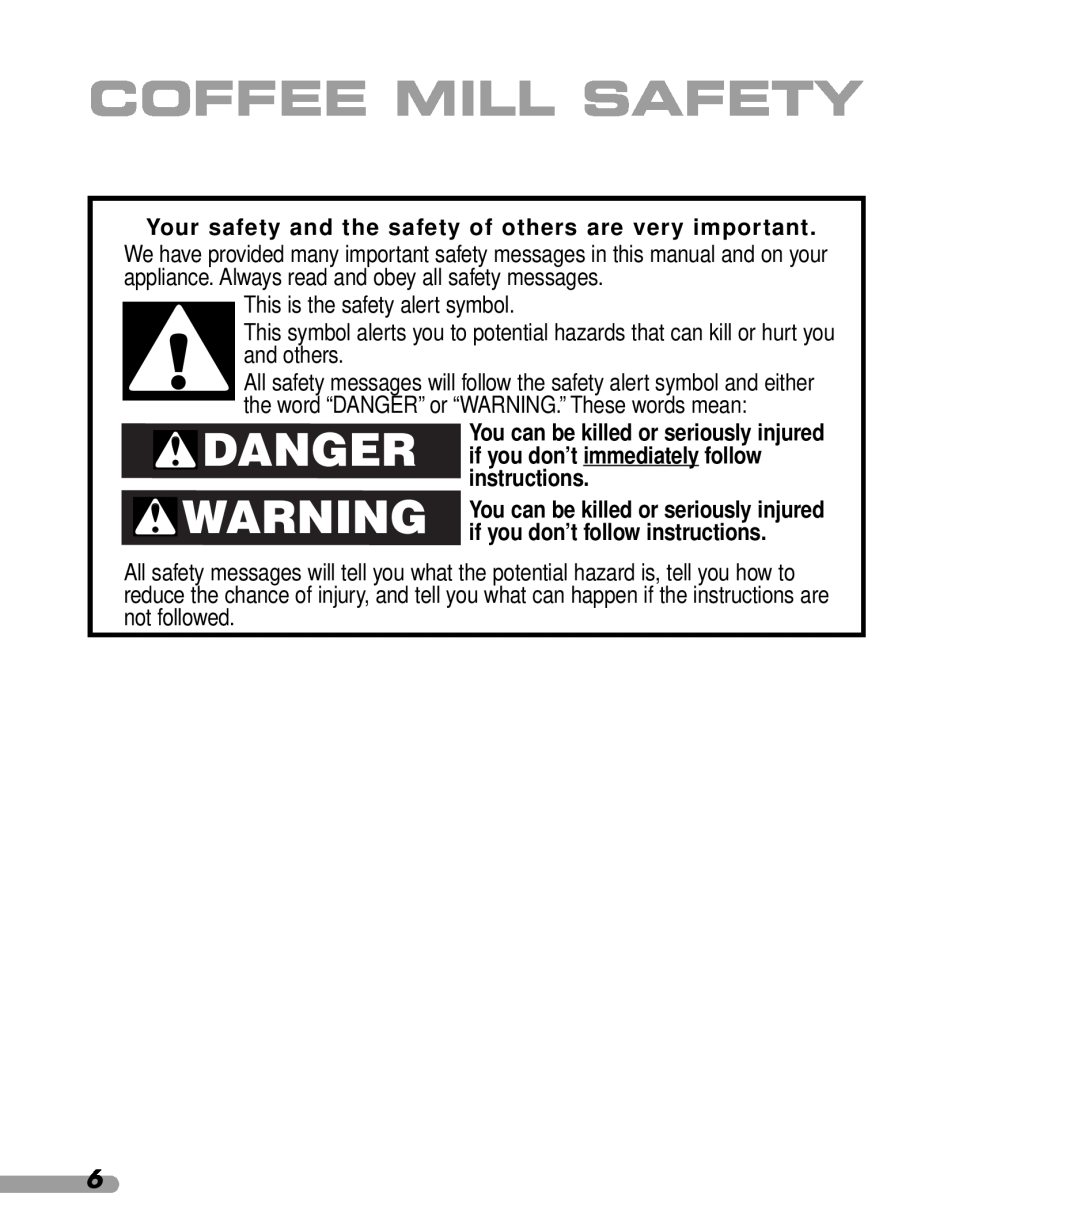 KitchenAid KPCG100 Coffee Mill Safety, Your safety and the safety of others are very important, and others, instructions 